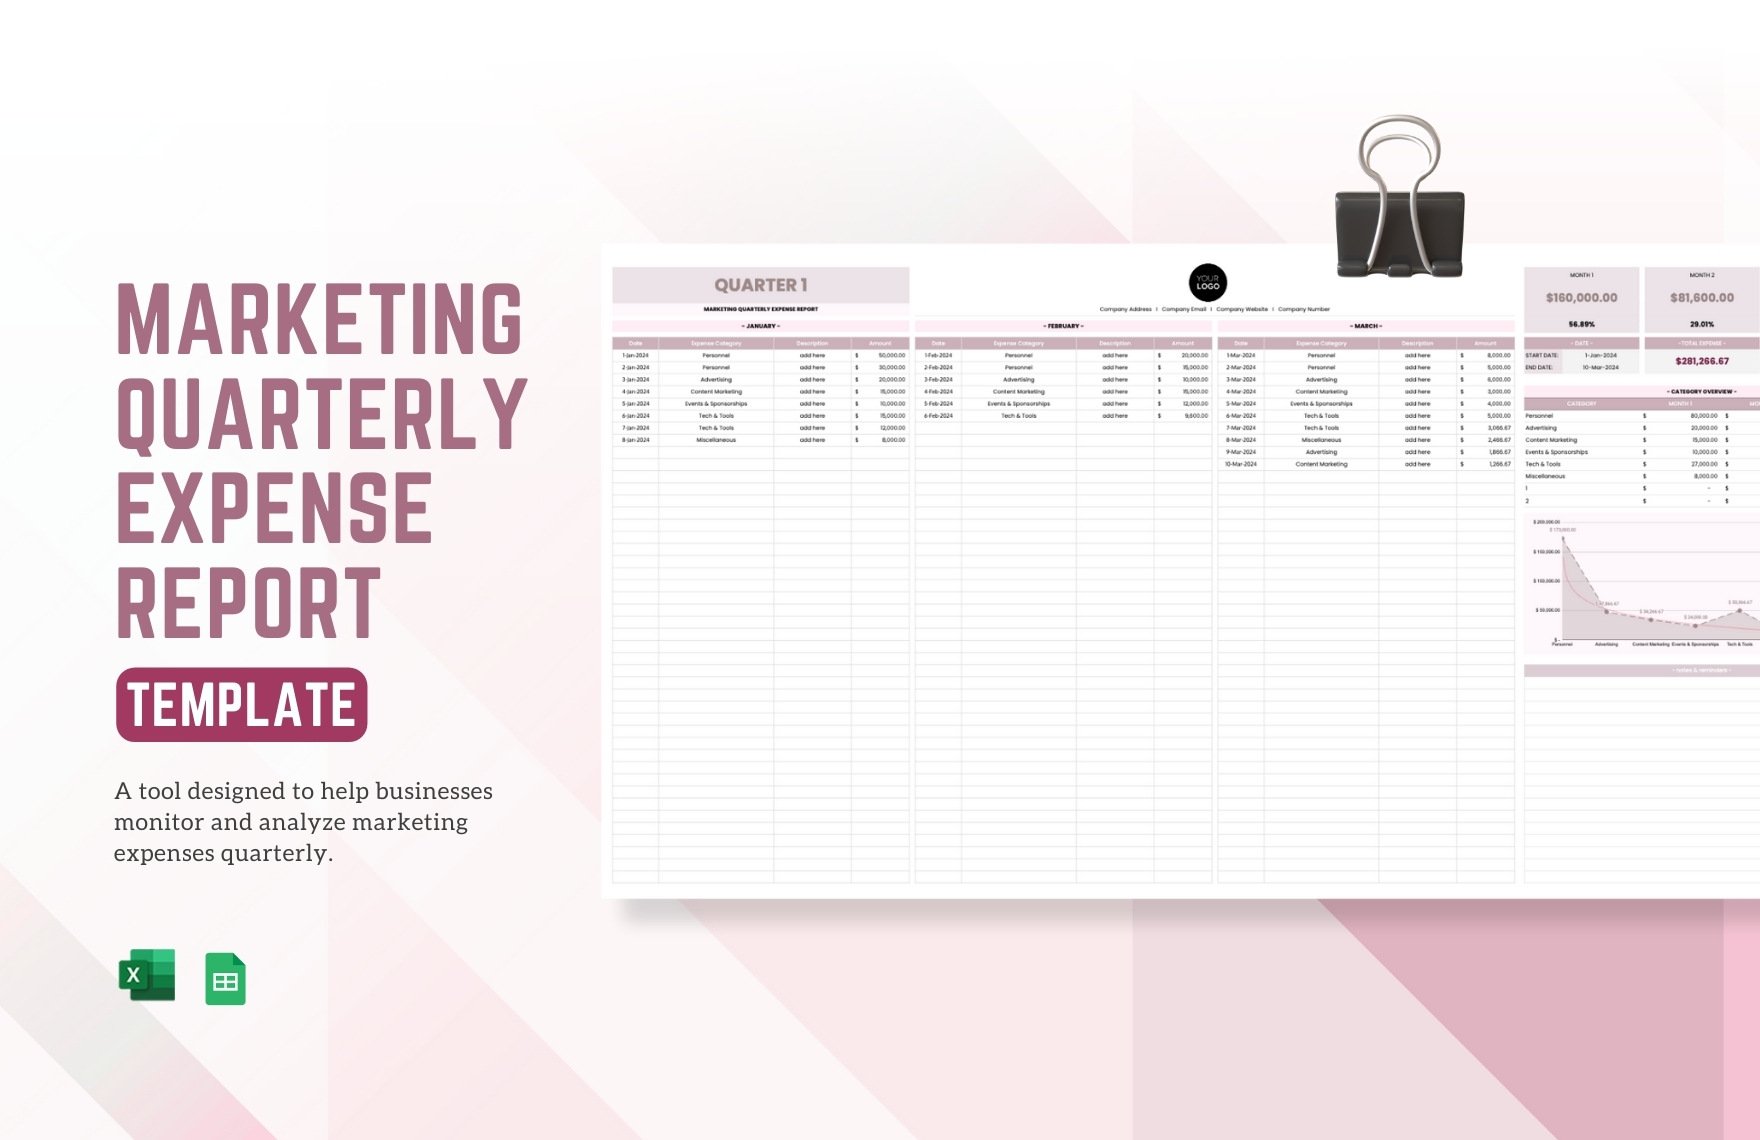 Marketing Quarterly Expense Report Template in Excel, Google Sheets